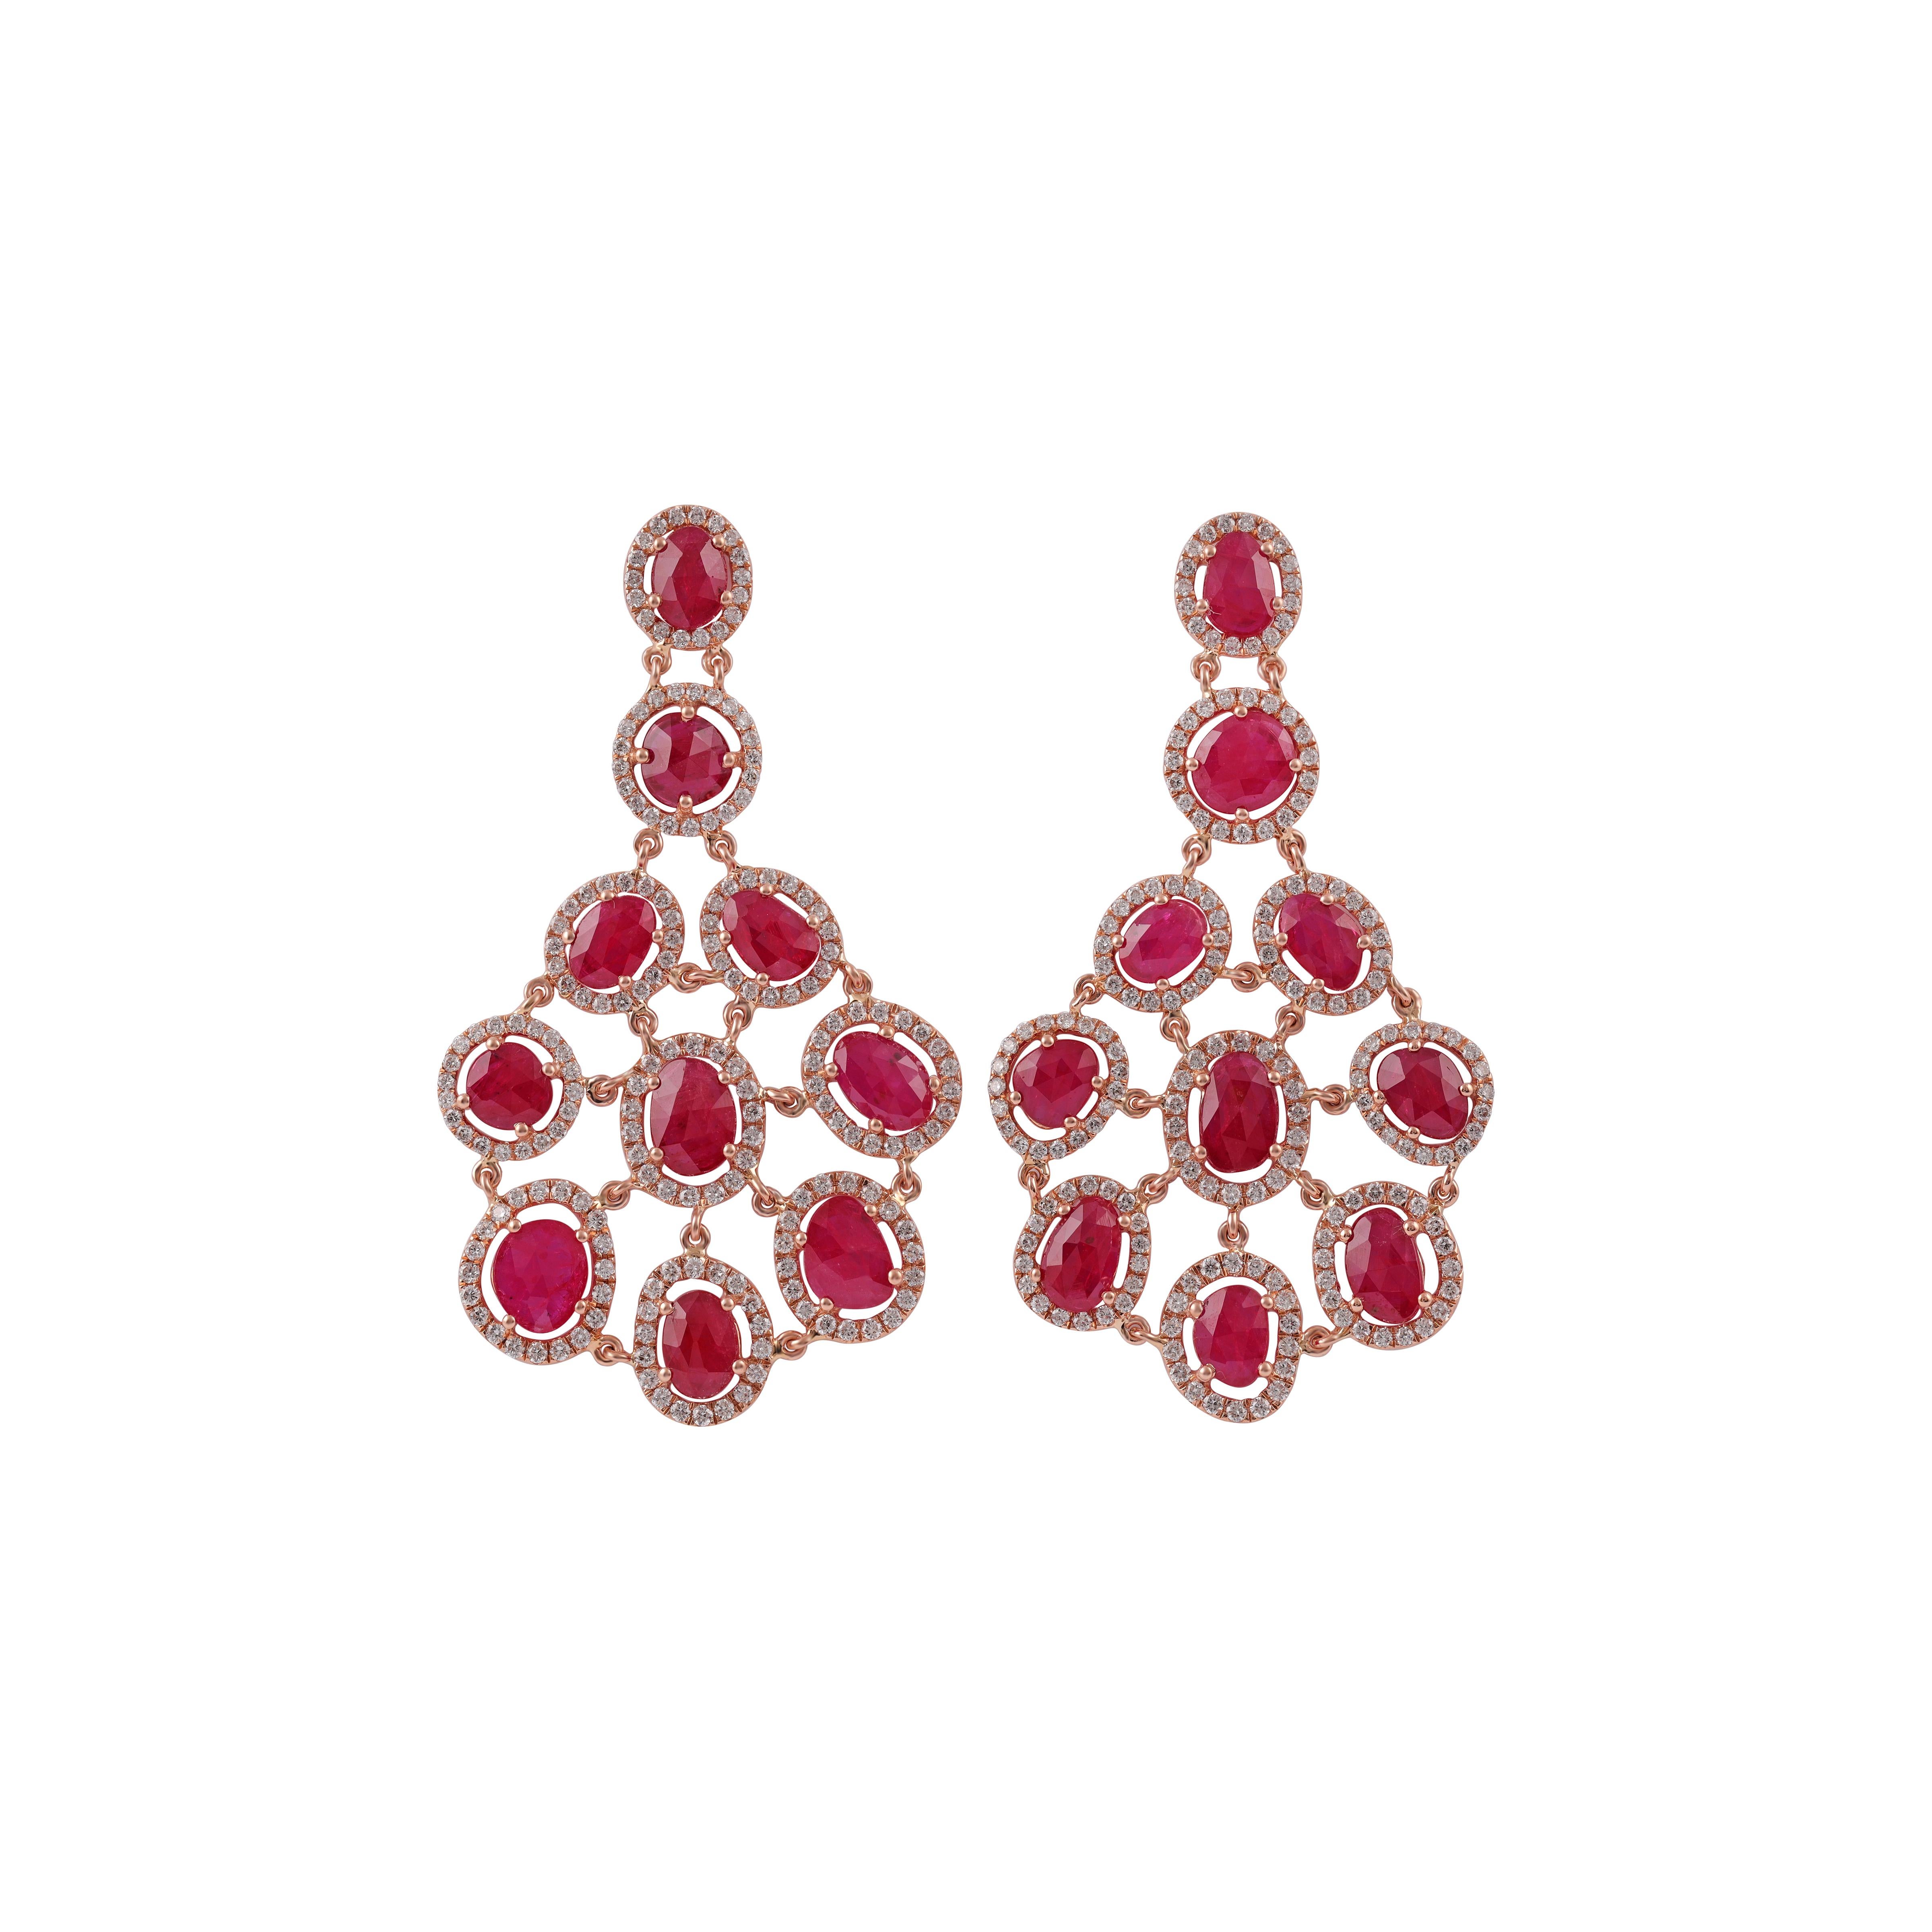 Magnificent Mozambique Ruby  & Diamonds Long Earrings in 18k Gold  
Mozambique Ruby approx. 10.03 CTS
373 Round brilliant cut diamonds 2.48 CTS
Gold 18k - 11.58gm

Custom Services
Request Customization